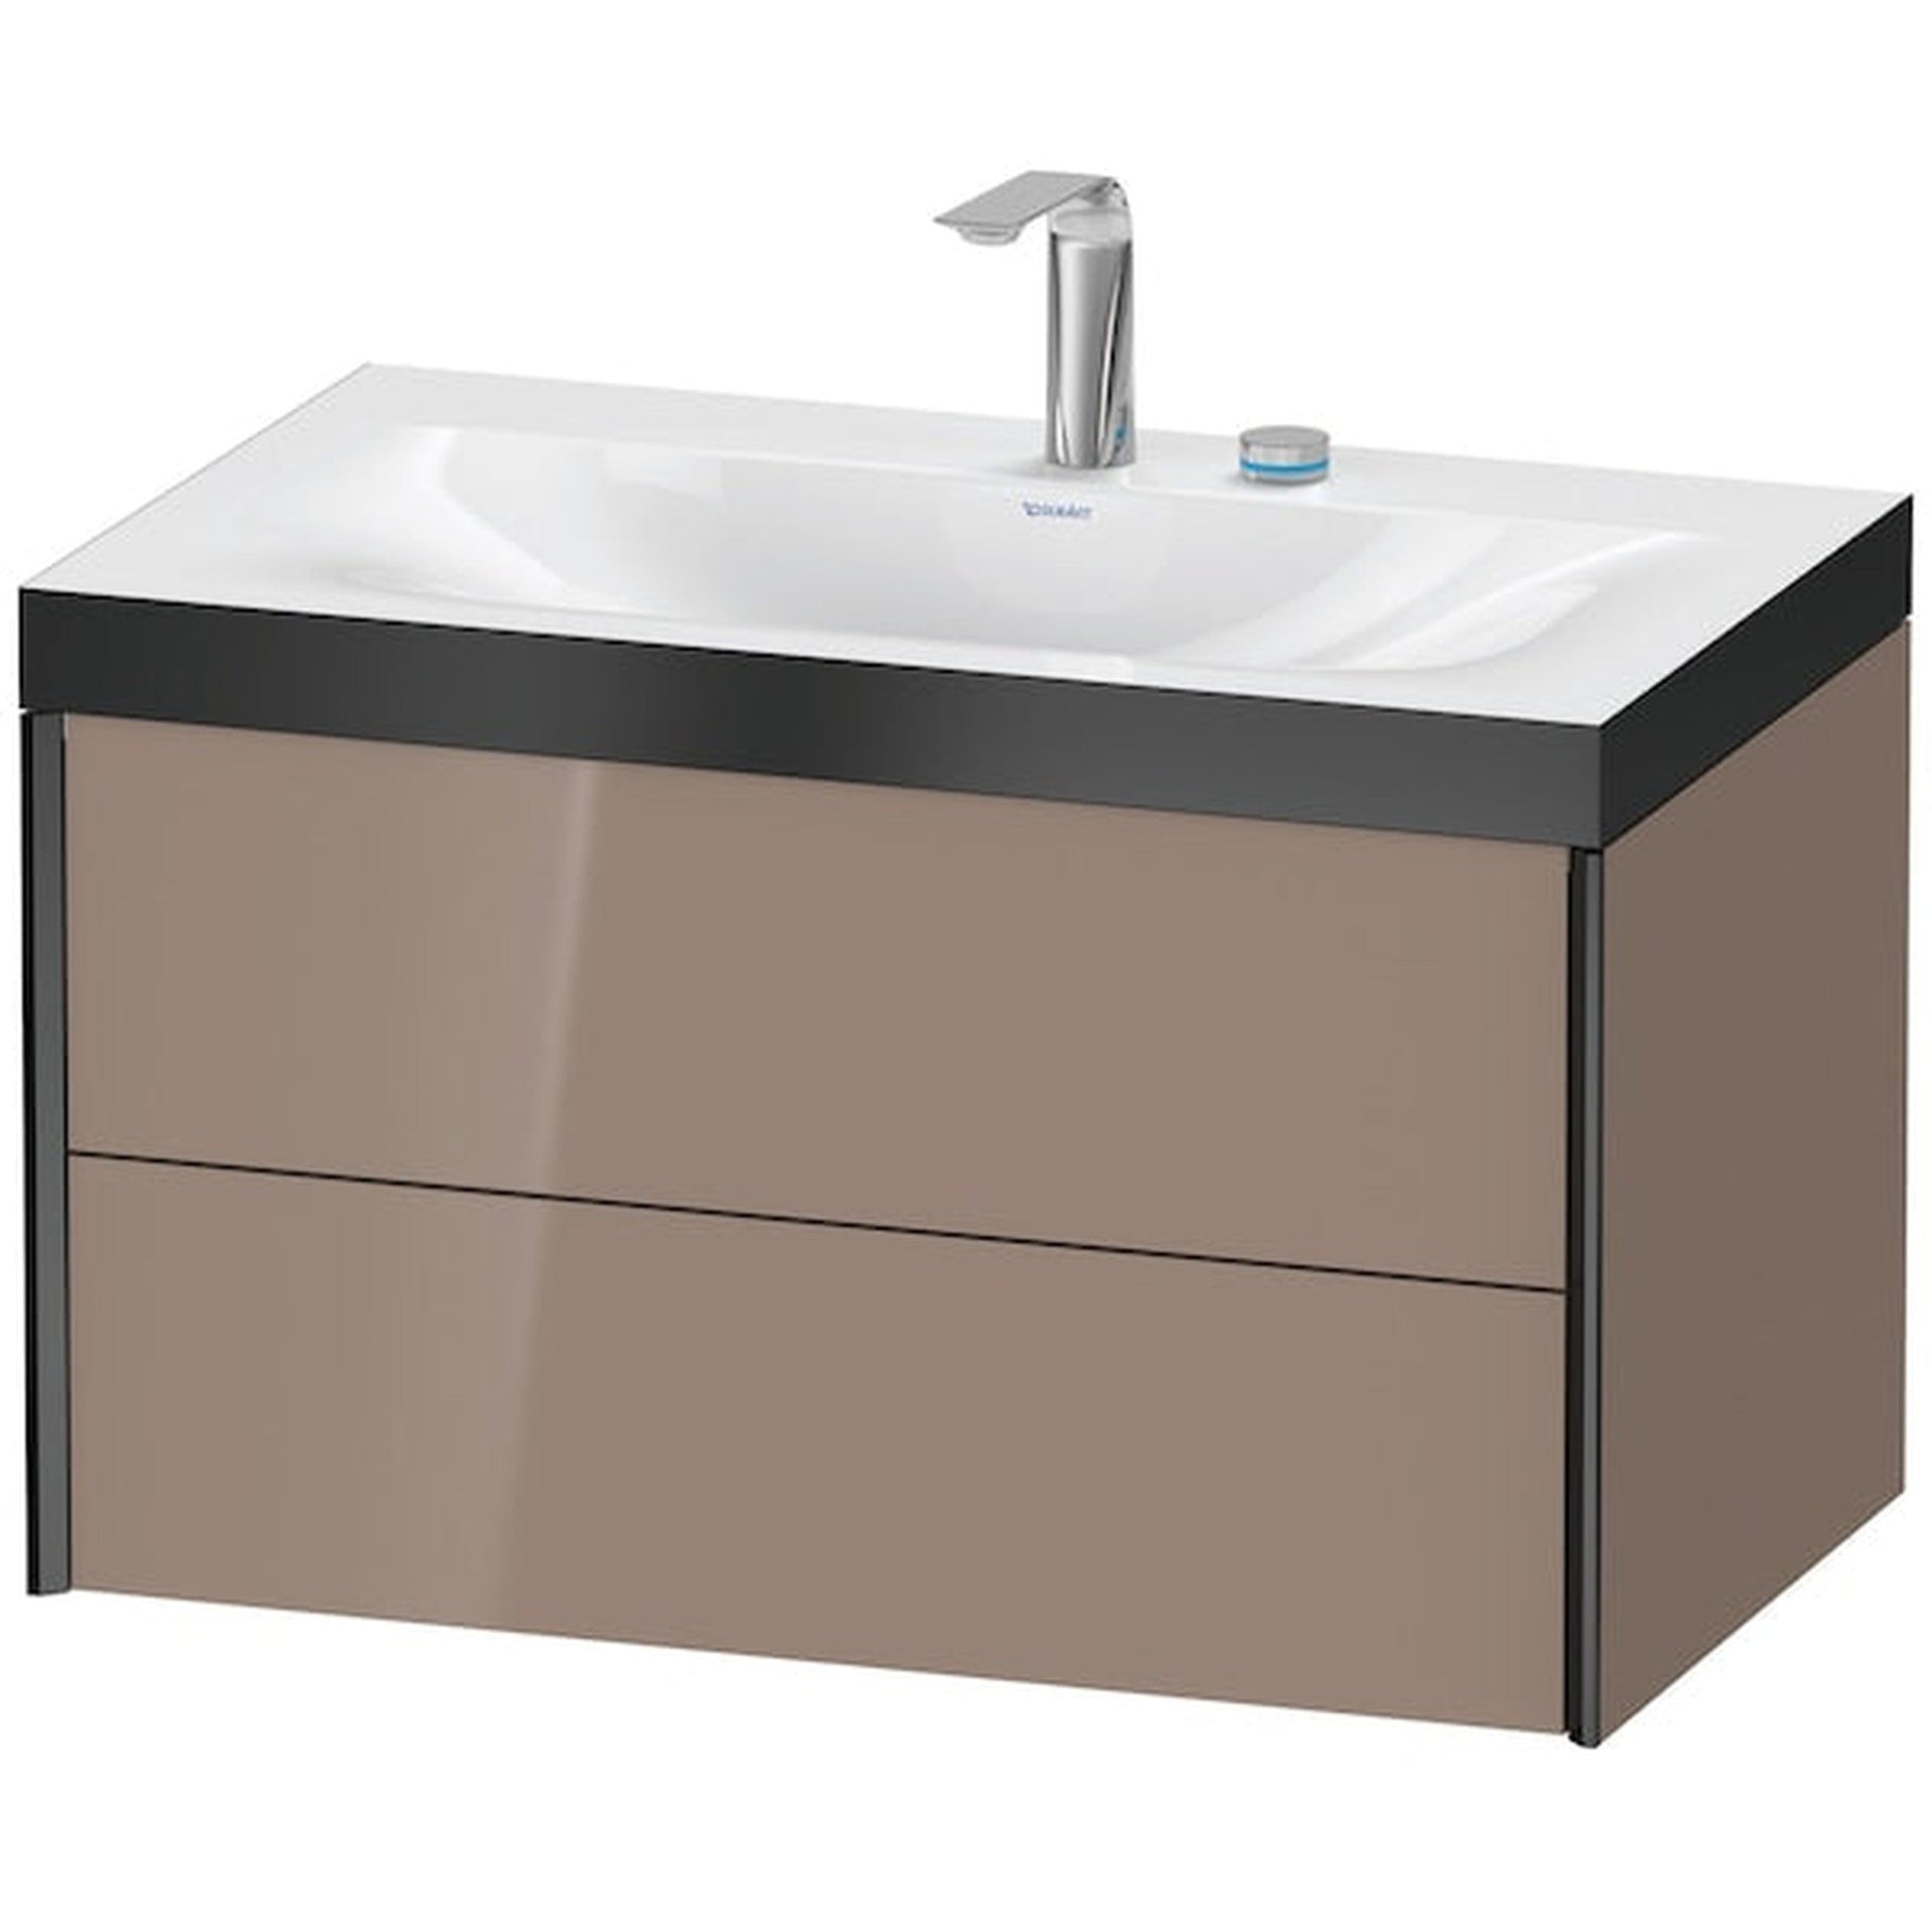 Duravit Xviu 31" x 20" x 19" Two Drawer C-Bonded Wall-Mount Vanity Kit With Two Tap Holes, Cappuccino (XV4615EB286P)